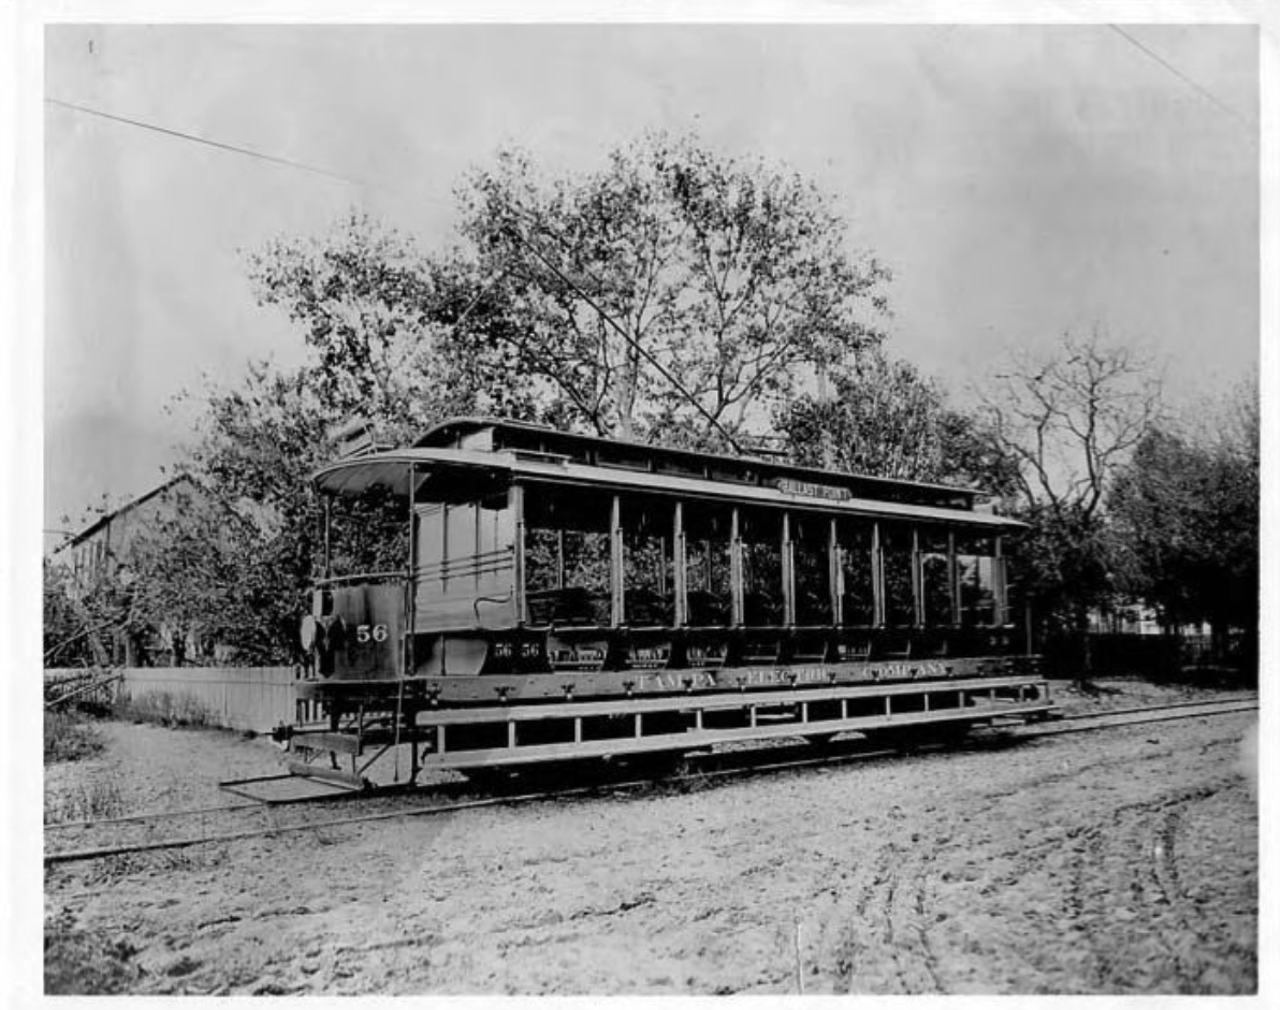 Ballast Point Streetcar No. 56, front and side views of open air car in Tampa, Florida in 1916.
Photo by Burgert Brothers via Tampa-Hillsborough County Public Library System